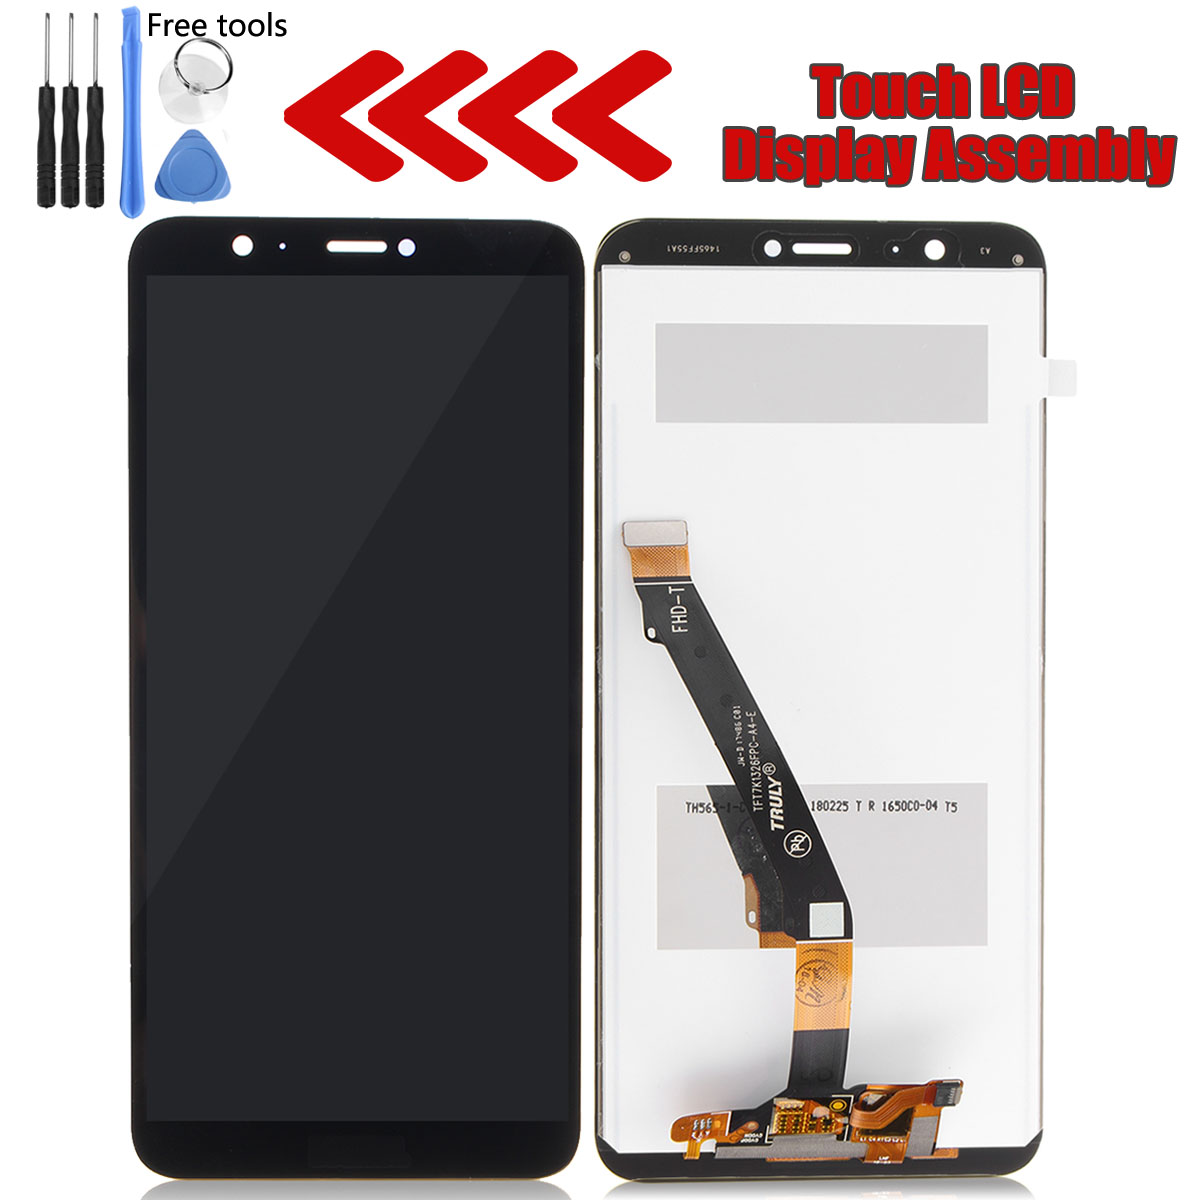 LCD-DisplayTouch-Screen-Screen-Replacement-For-Huawei-Enjoy-7S-Huawei-P-smart-FIG-LX1-LX2-LA1-1325730